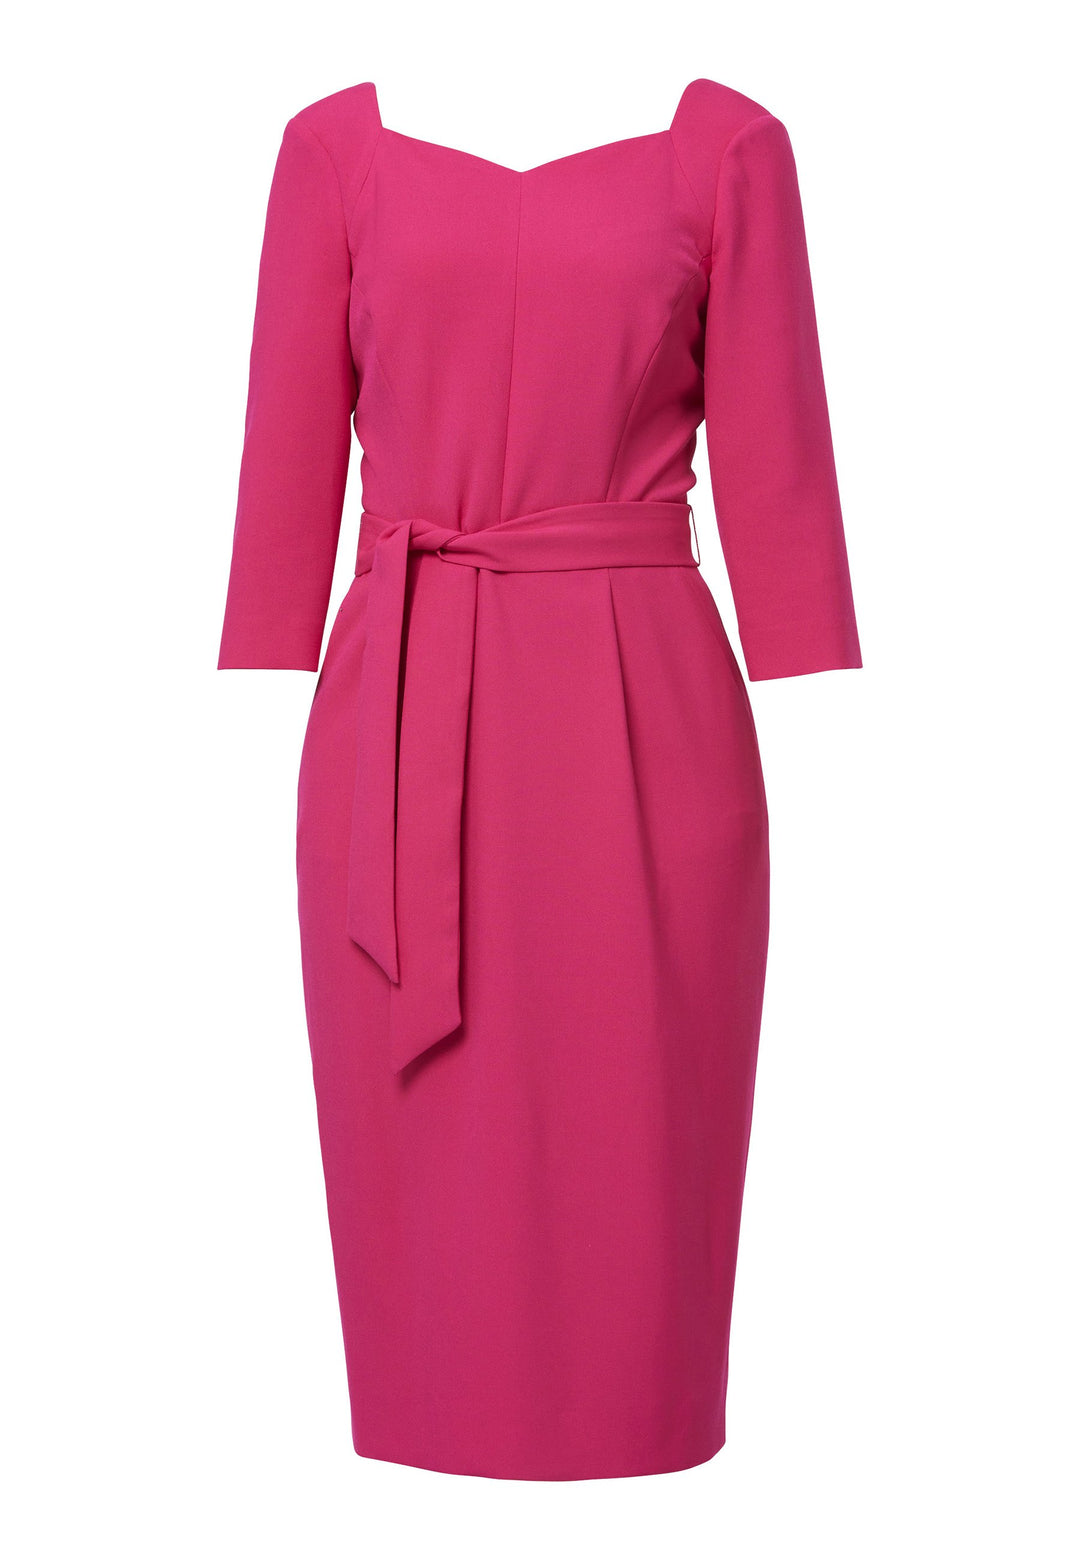 Introducing the Thea Cerise Pink Dress, a stunning reinterpretation of a classic Helen McAlinden silhouette. It features practical pockets, a detachable belt, and a pencil skirt that gracefully falls to a mid-calf length, allowing for a sophisticated and refined look. The inclusion of a back vent ensures ease of movement and comfort. Adding a new twist to the design, the dress showcases a feminine and romantic sweetheart neckline. 